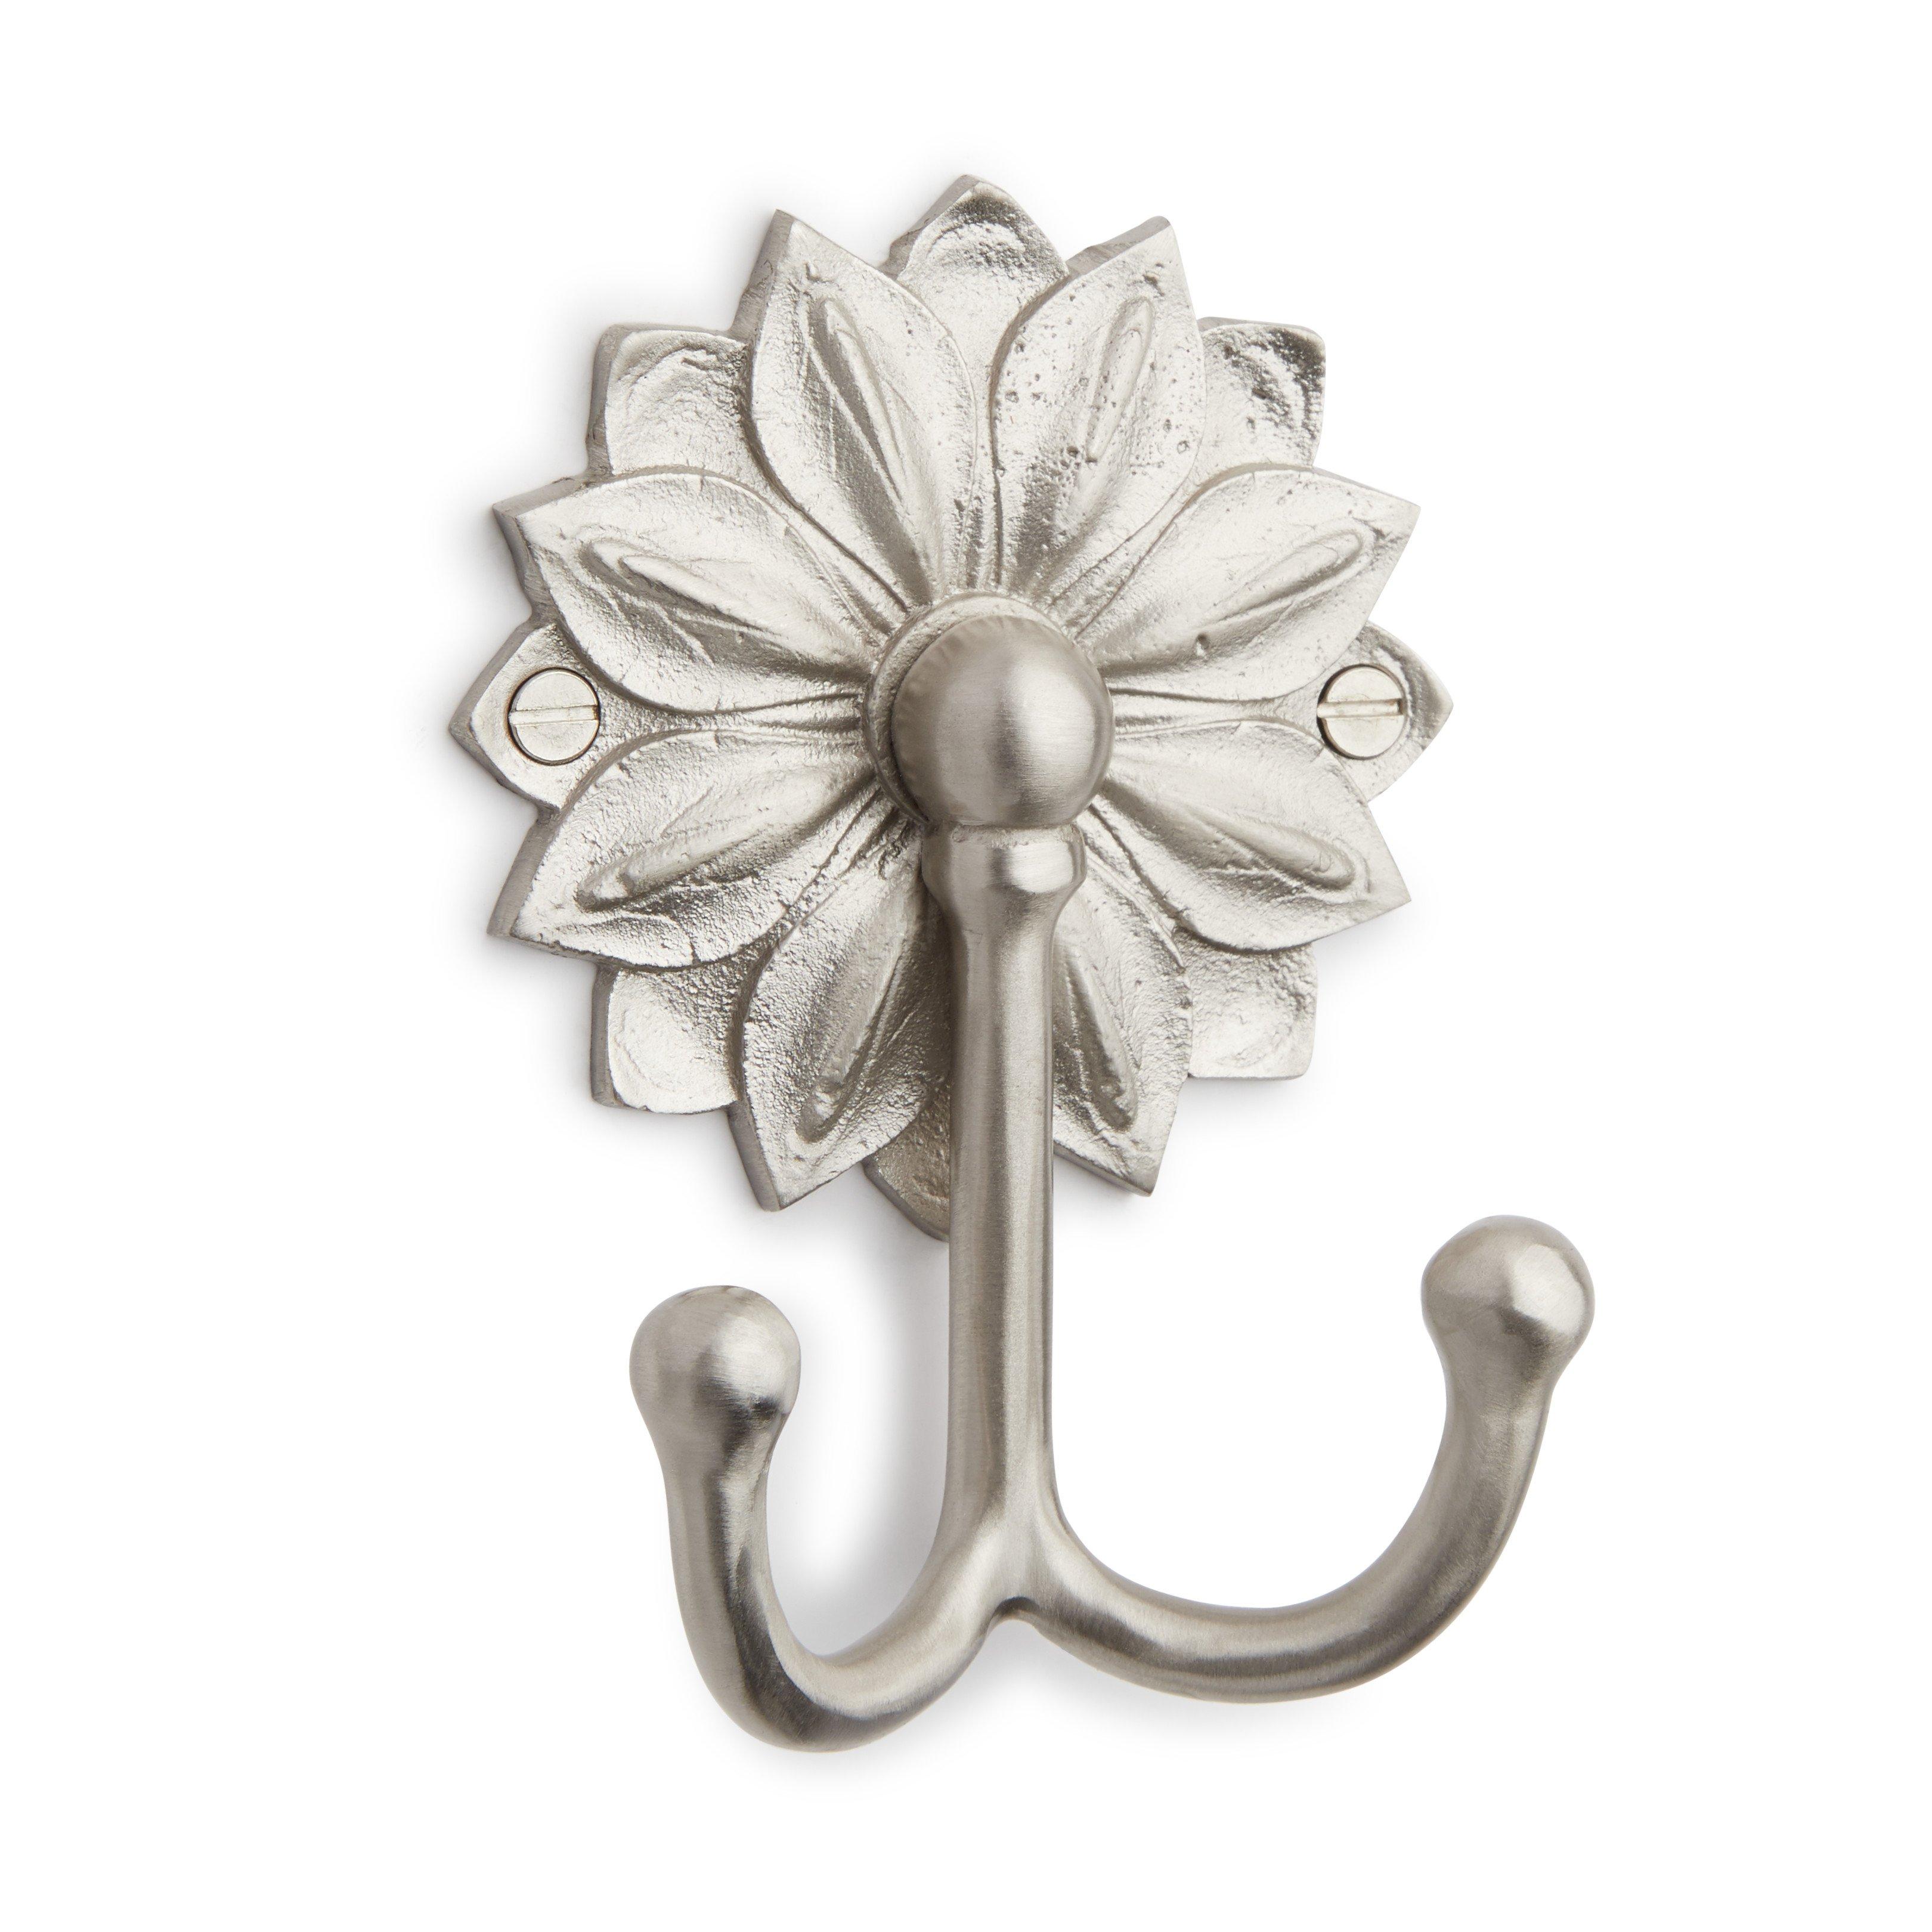 Signature Hardware 946092 Floral Solid Brass Double Coat Hook - Nickel, Silver